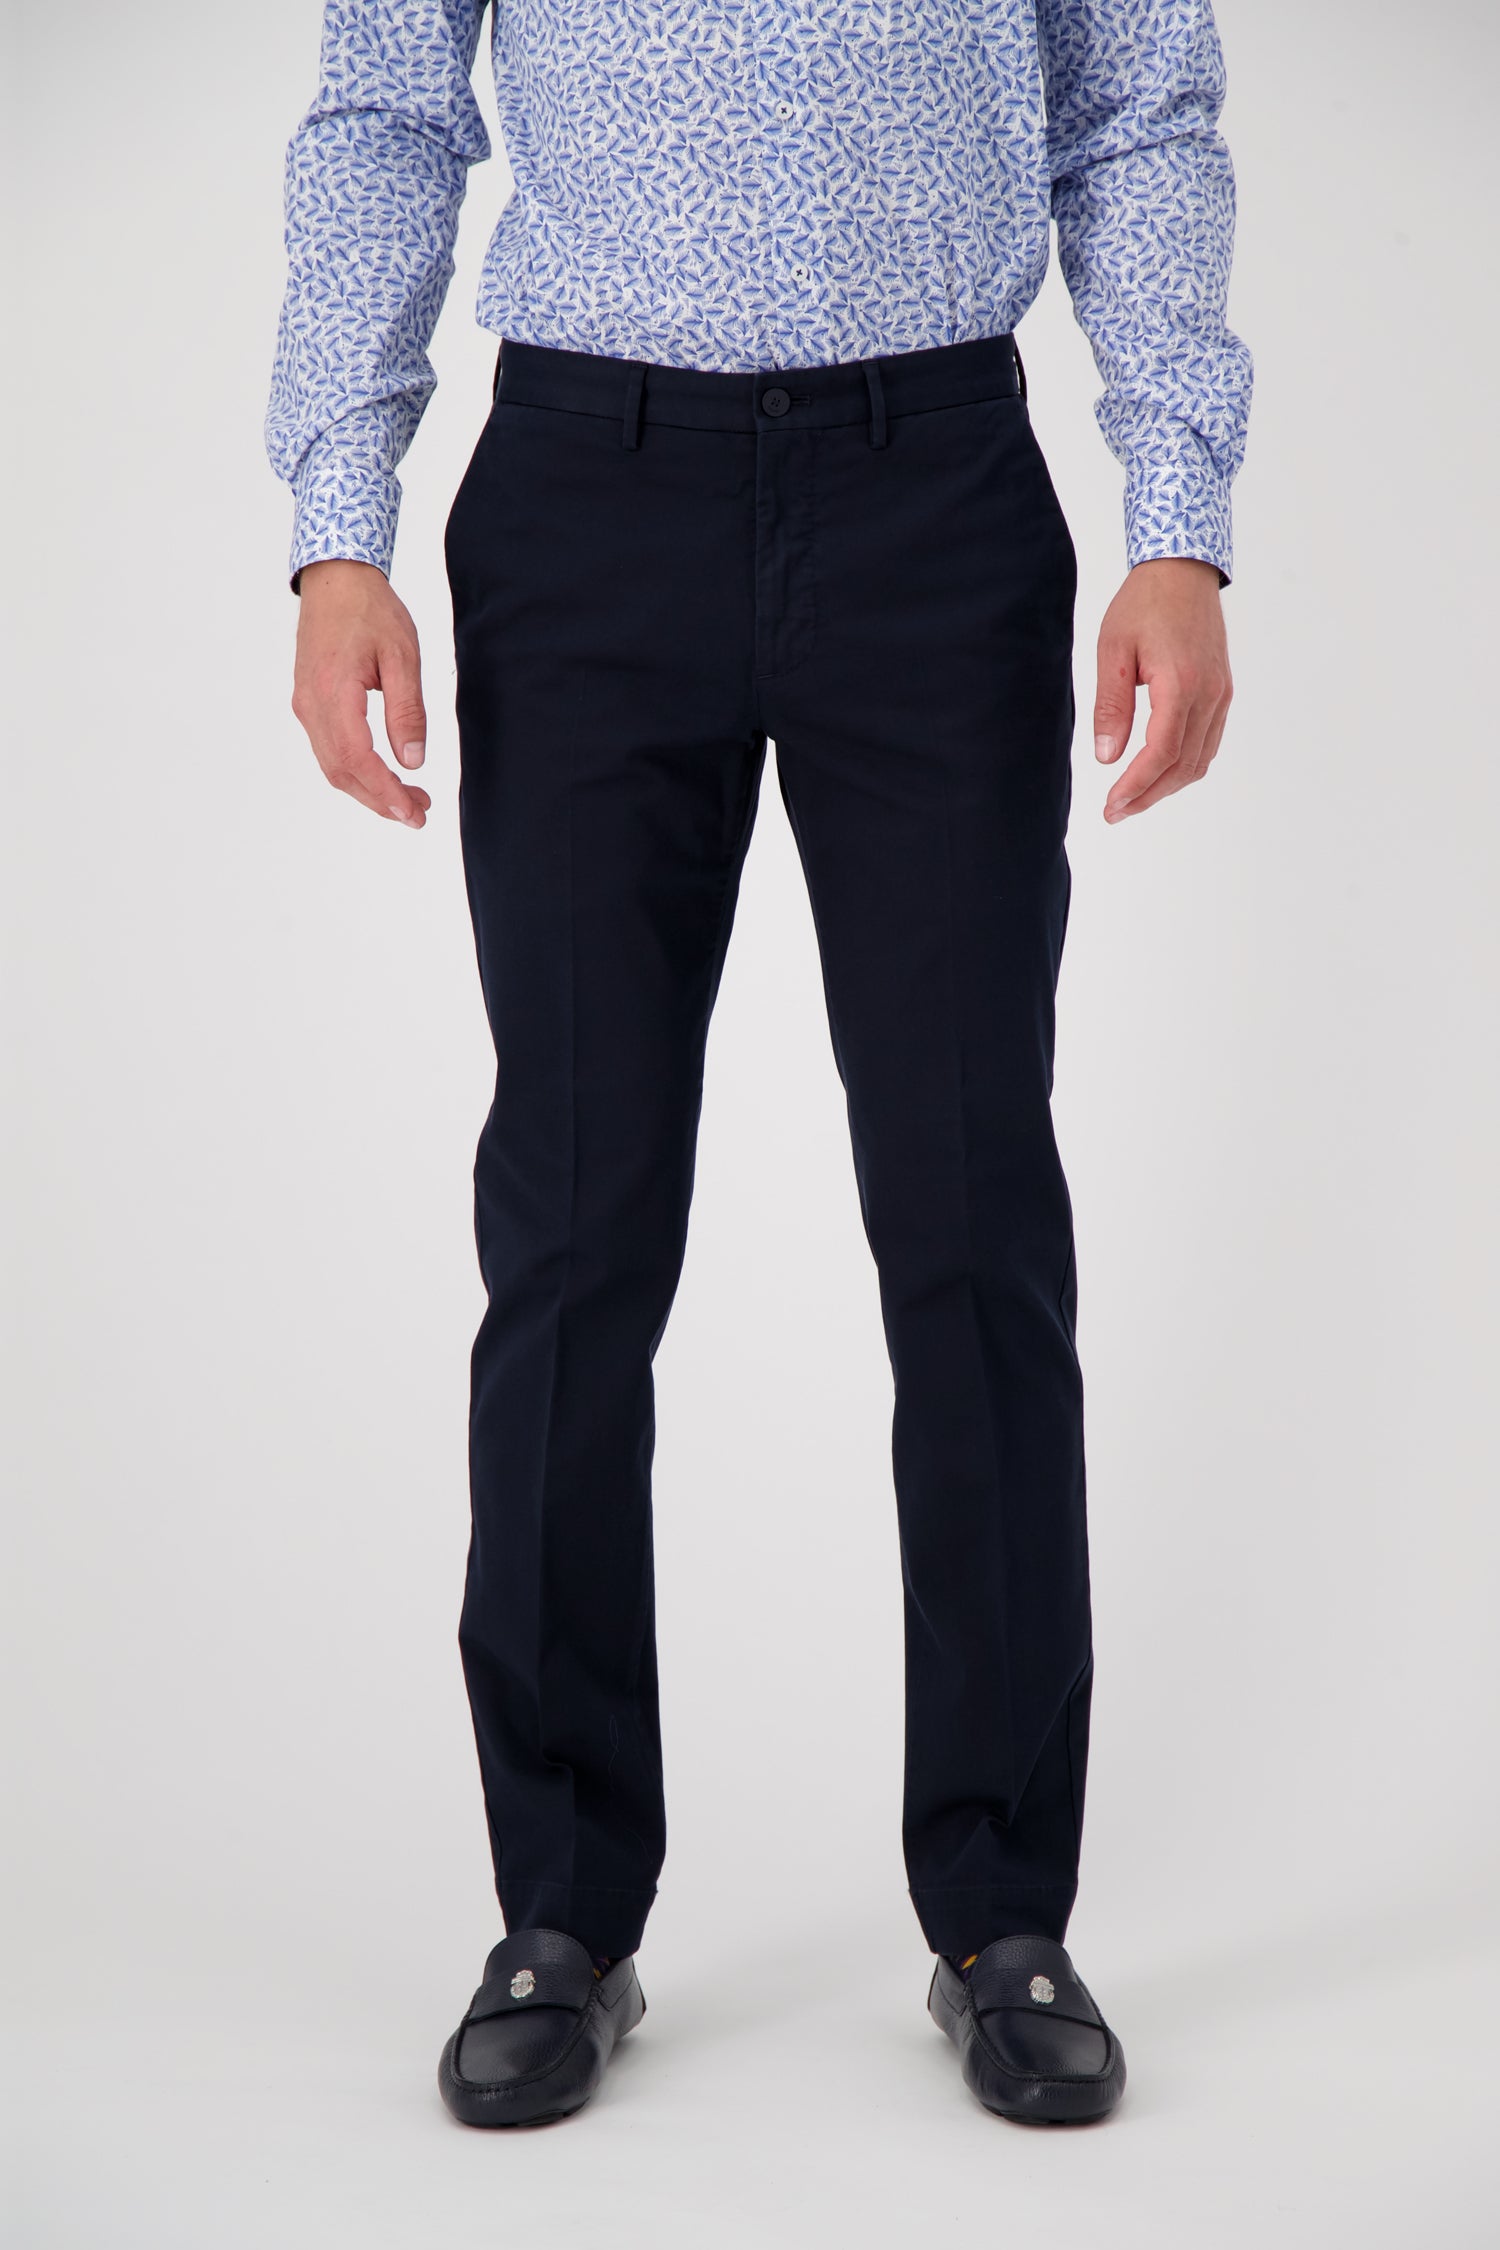 Incotex Navy Trousers